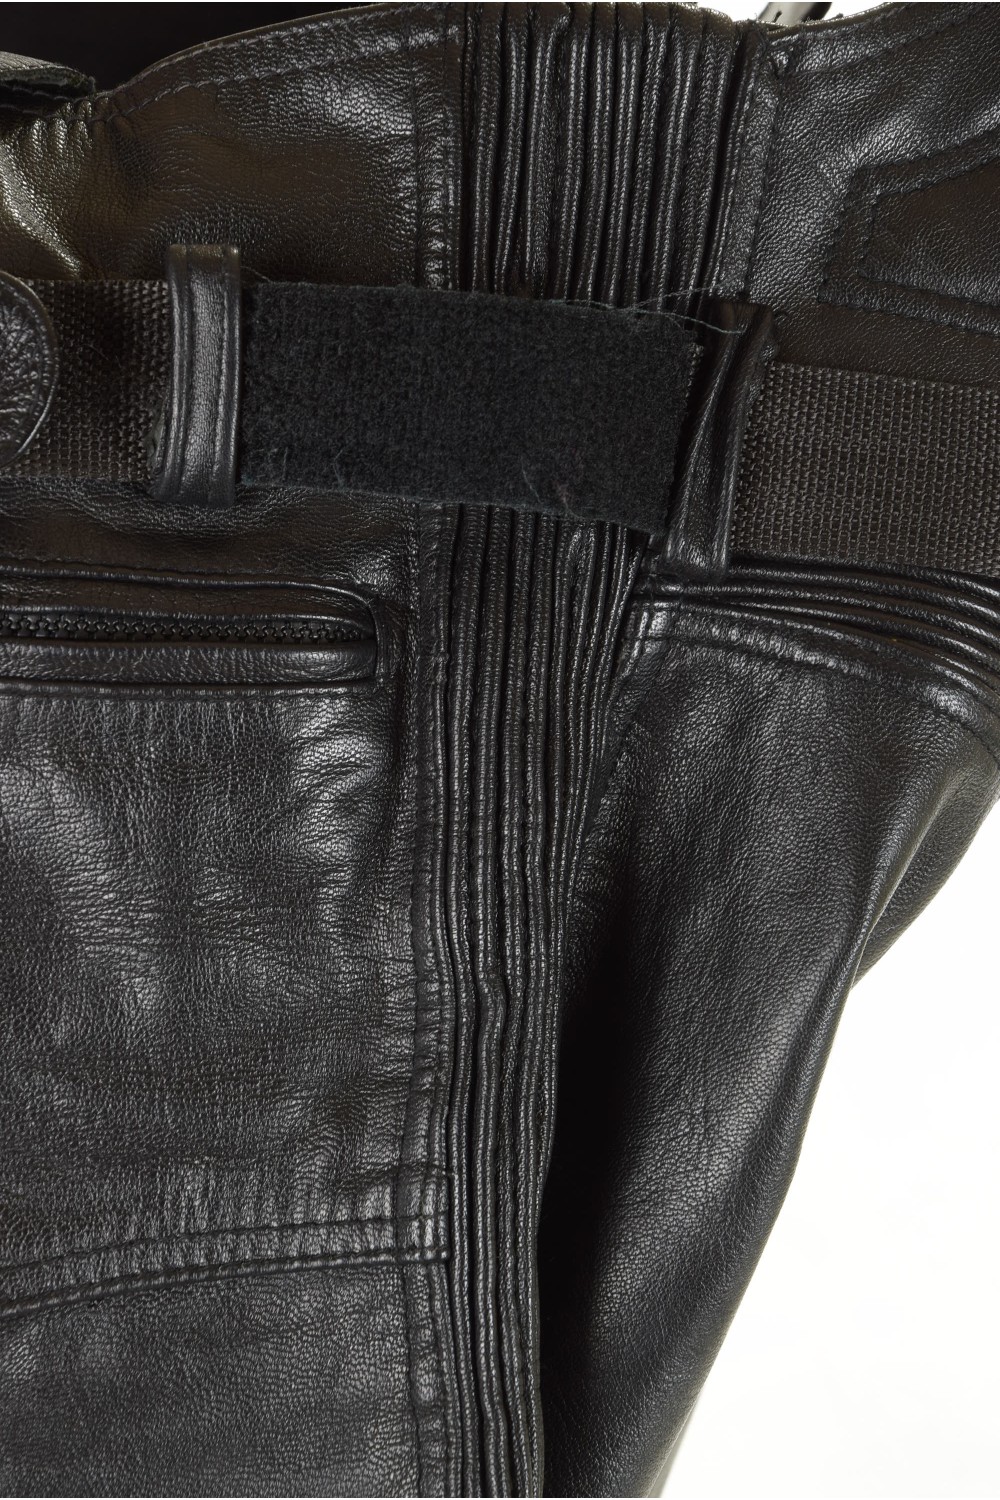 Biker leather overall | furlando - leather and fur.